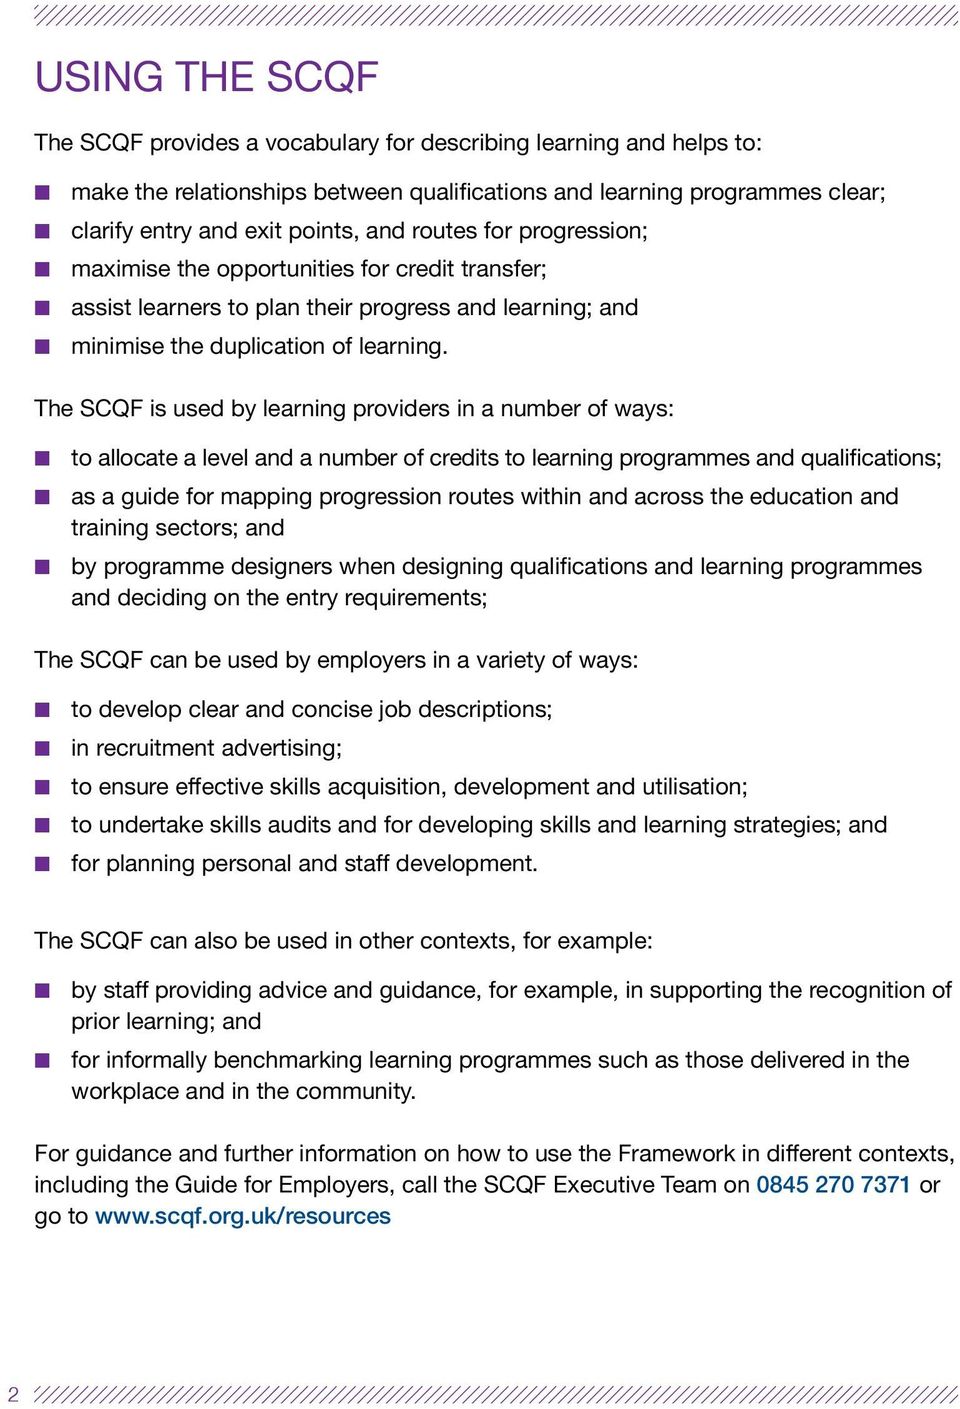 The SCQF is used by learning providers in a number of ways: to allocate a level and a number of credits to learning programmes and qualifications; as a guide for mapping progression routes within and